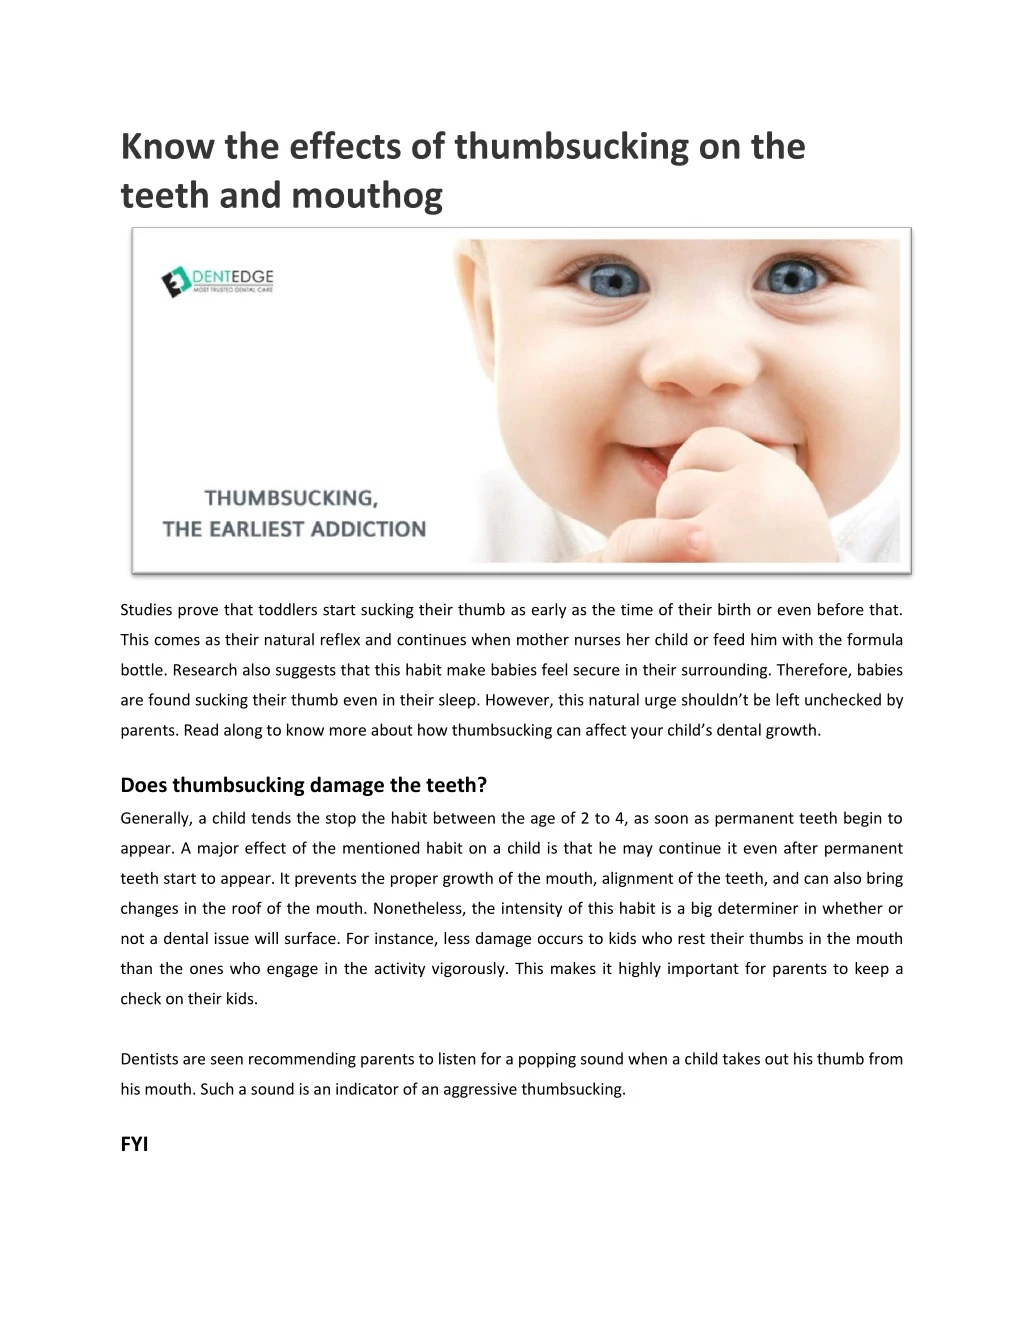 know the effects of thumbsucking on the teeth